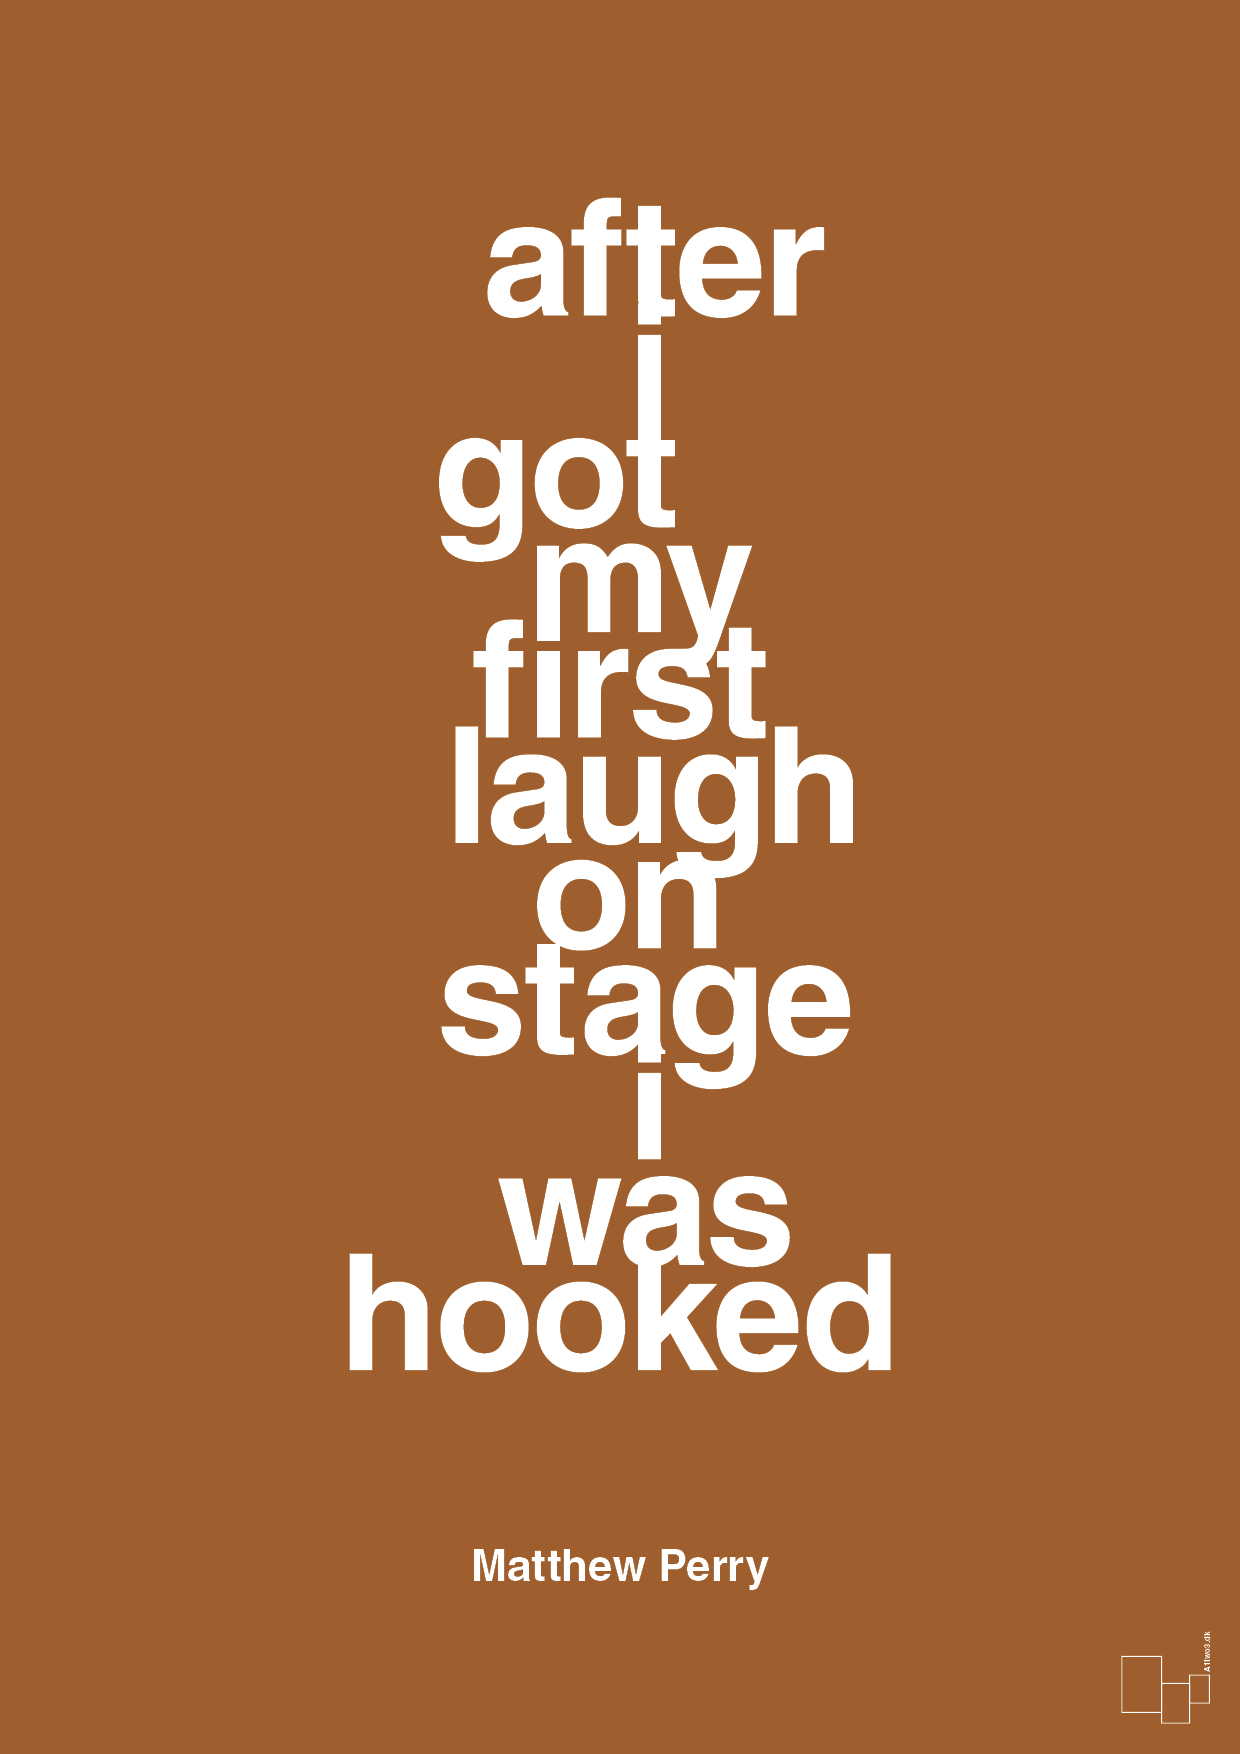 after i got my first laugh on stage i was hooked - Plakat med Citater i Cognac